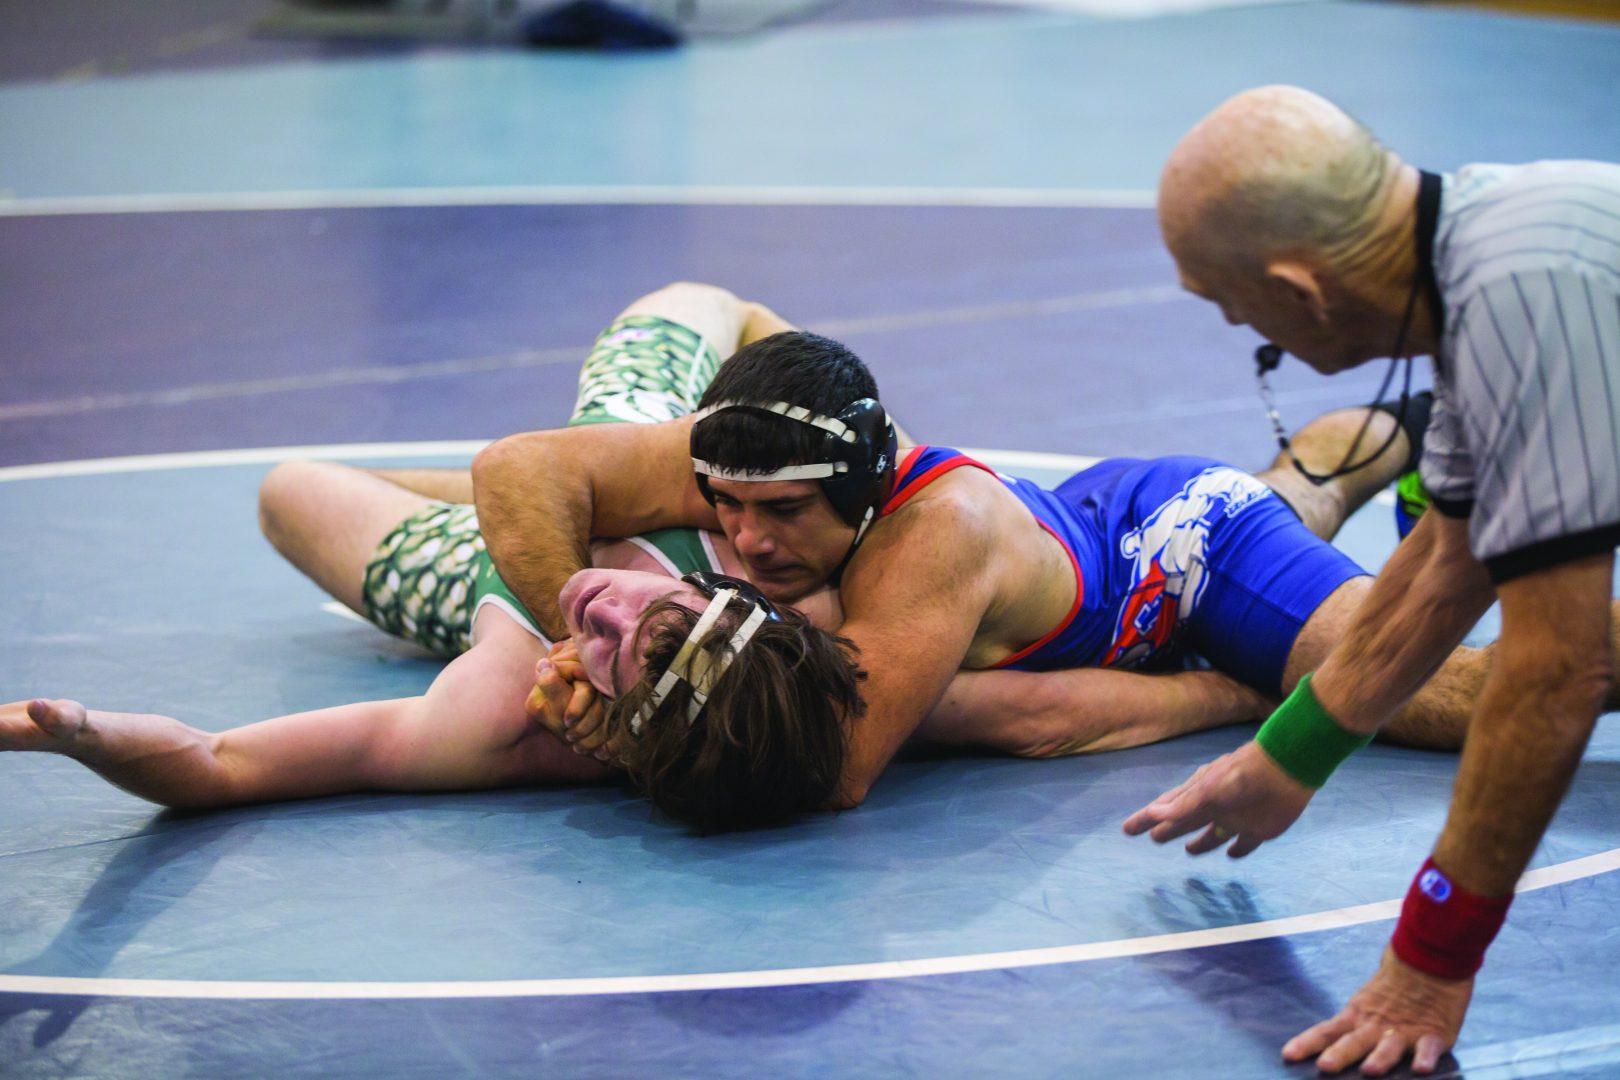 Fresno+State+wrestler+Davit+Gevorgyan+attempts+to+pin+CSU+Sacramento%E2%80%99s+Teddy+Anderson.+He+during+the+NCWA+California+State+Championship+hosted+at+Fresno+State+on+Feb.+11%2C+2017.+%28Daniel+Avalos%2F+The+Collegian%29